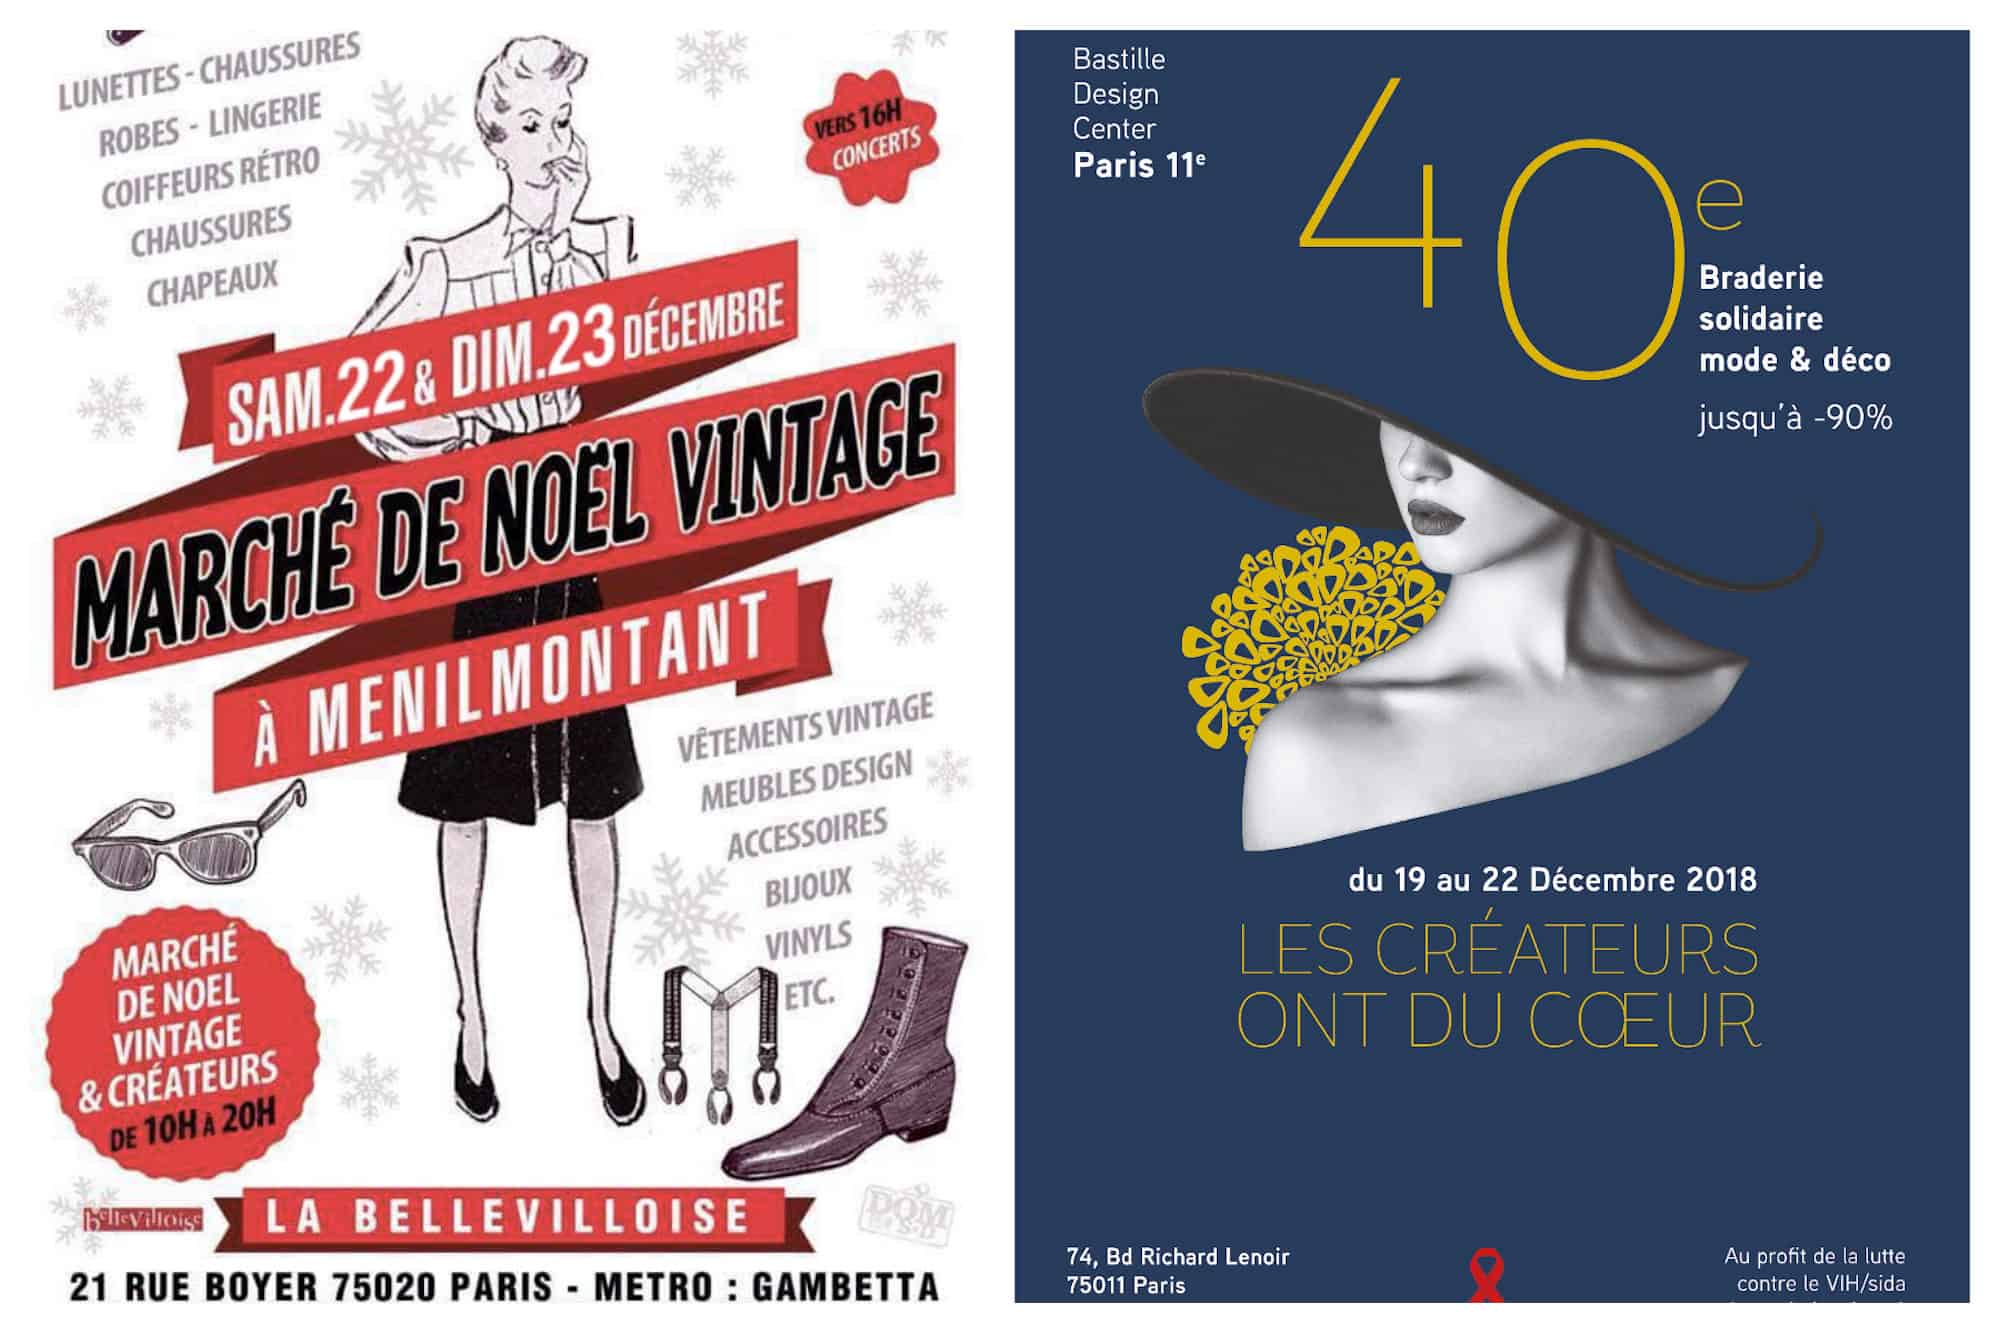 Markets in Paris are fantastic, especially for Christmas shopping, including the vintage Christmas market of Menilmontantant (left) and the chicer fashion and home design sale in the 11th district of Paris (left).